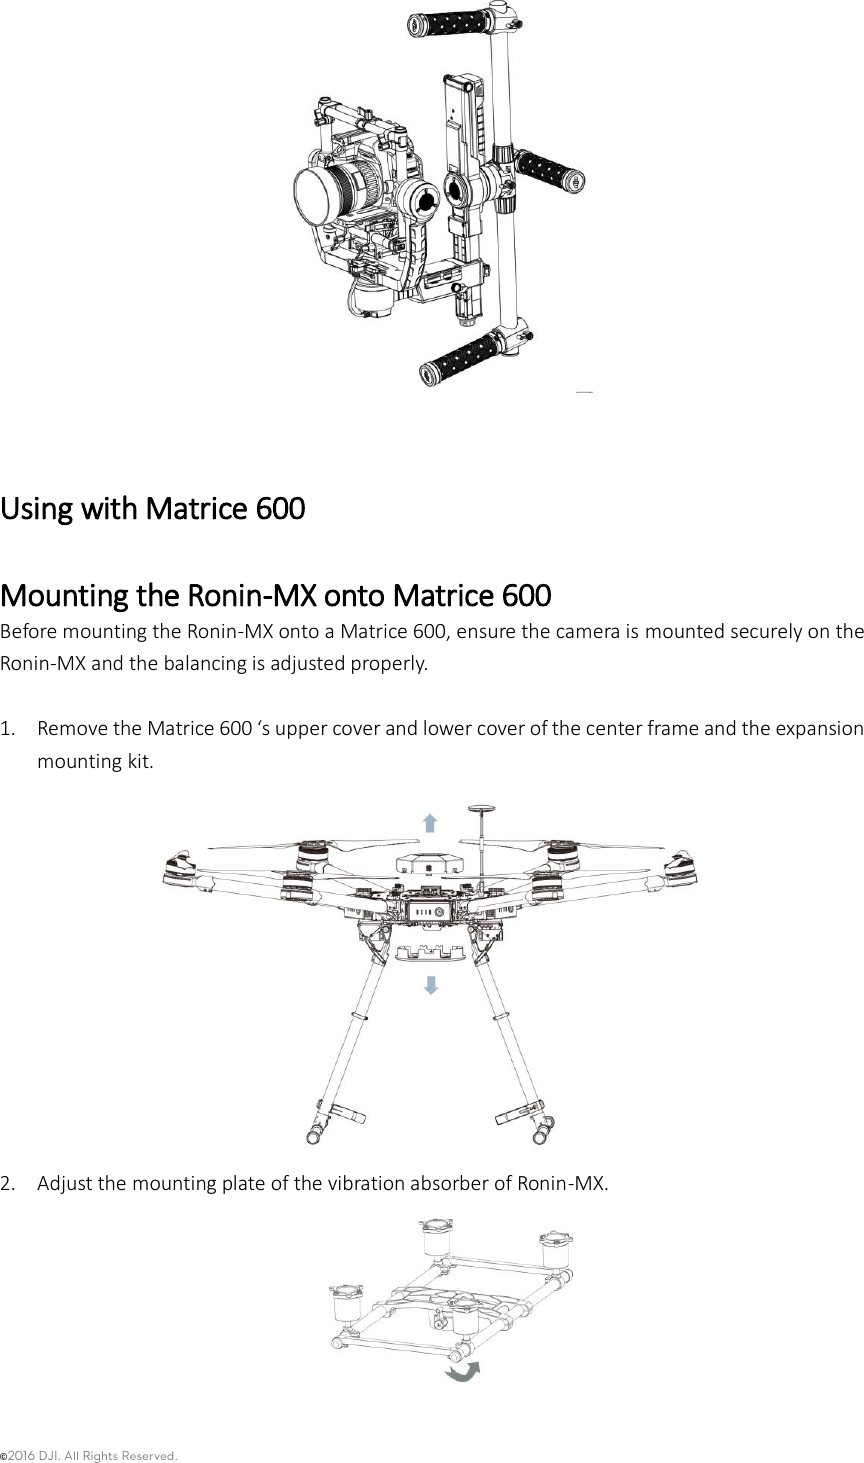 ©2016 DJI. All Rights Reserved.      Using with Matrice 600 Mounting the Ronin-MX onto Matrice 600 Before mounting the Ronin-MX onto a Matrice 600, ensure the camera is mounted securely on the Ronin-MX and the balancing is adjusted properly.  1. Remove the Matrice 600 ‘s upper cover and lower cover of the center frame and the expansion mounting kit.  2. Adjust the mounting plate of the vibration absorber of Ronin-MX.     